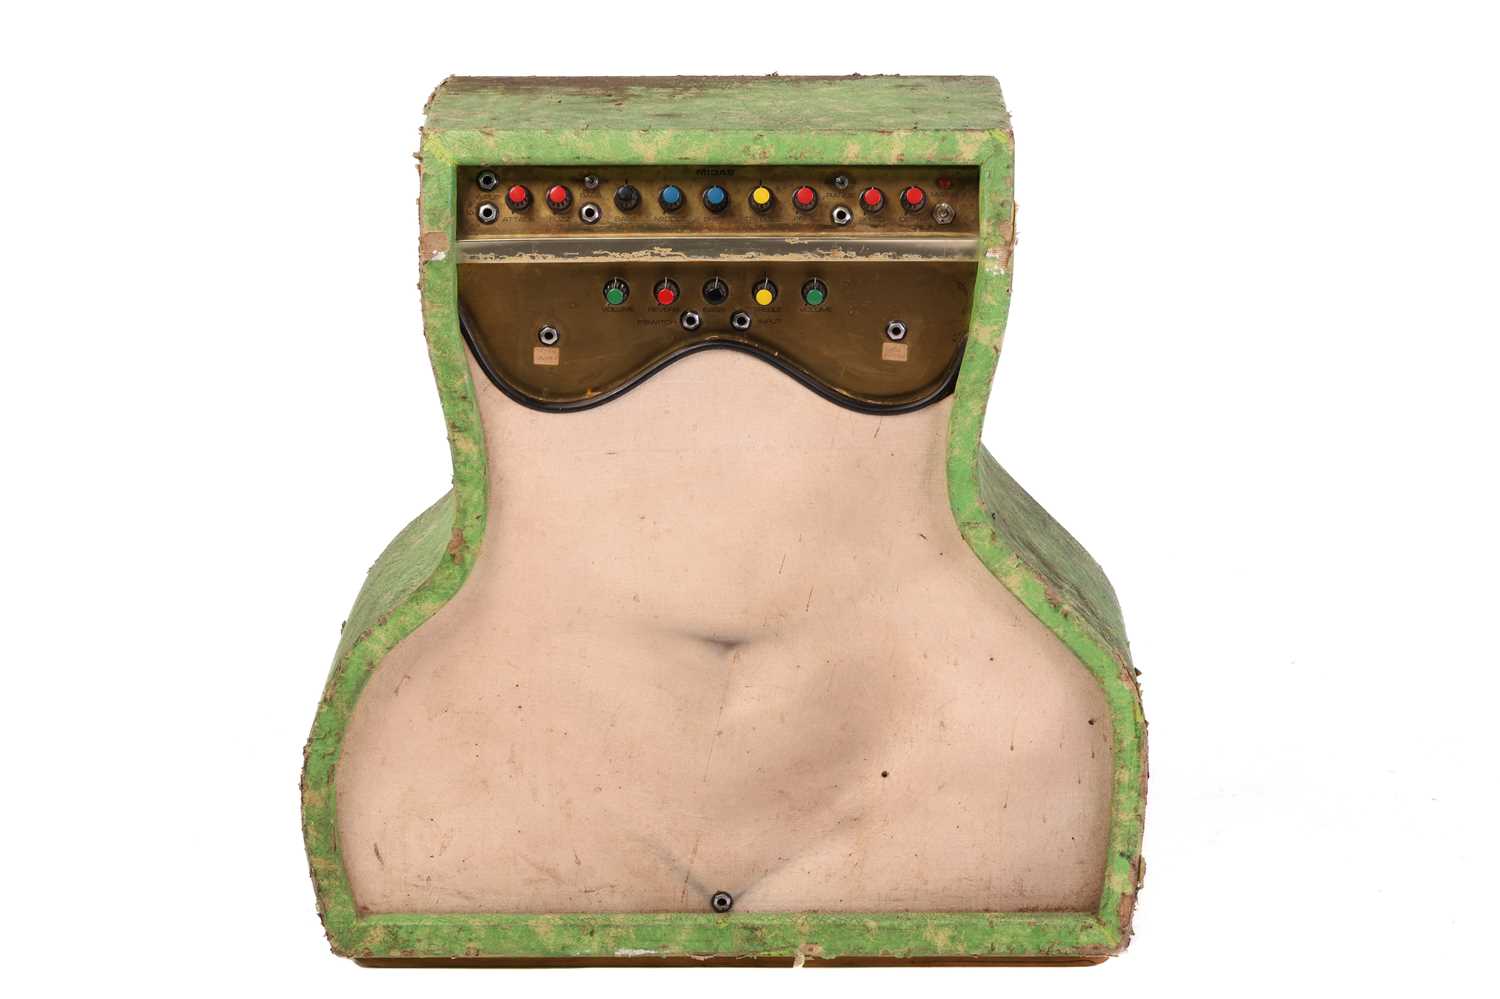 A 'Midas' guitar amplifier, from the collection of Vivian Stanshall, founding member of the Bonzo Dog Doo-Dah Band